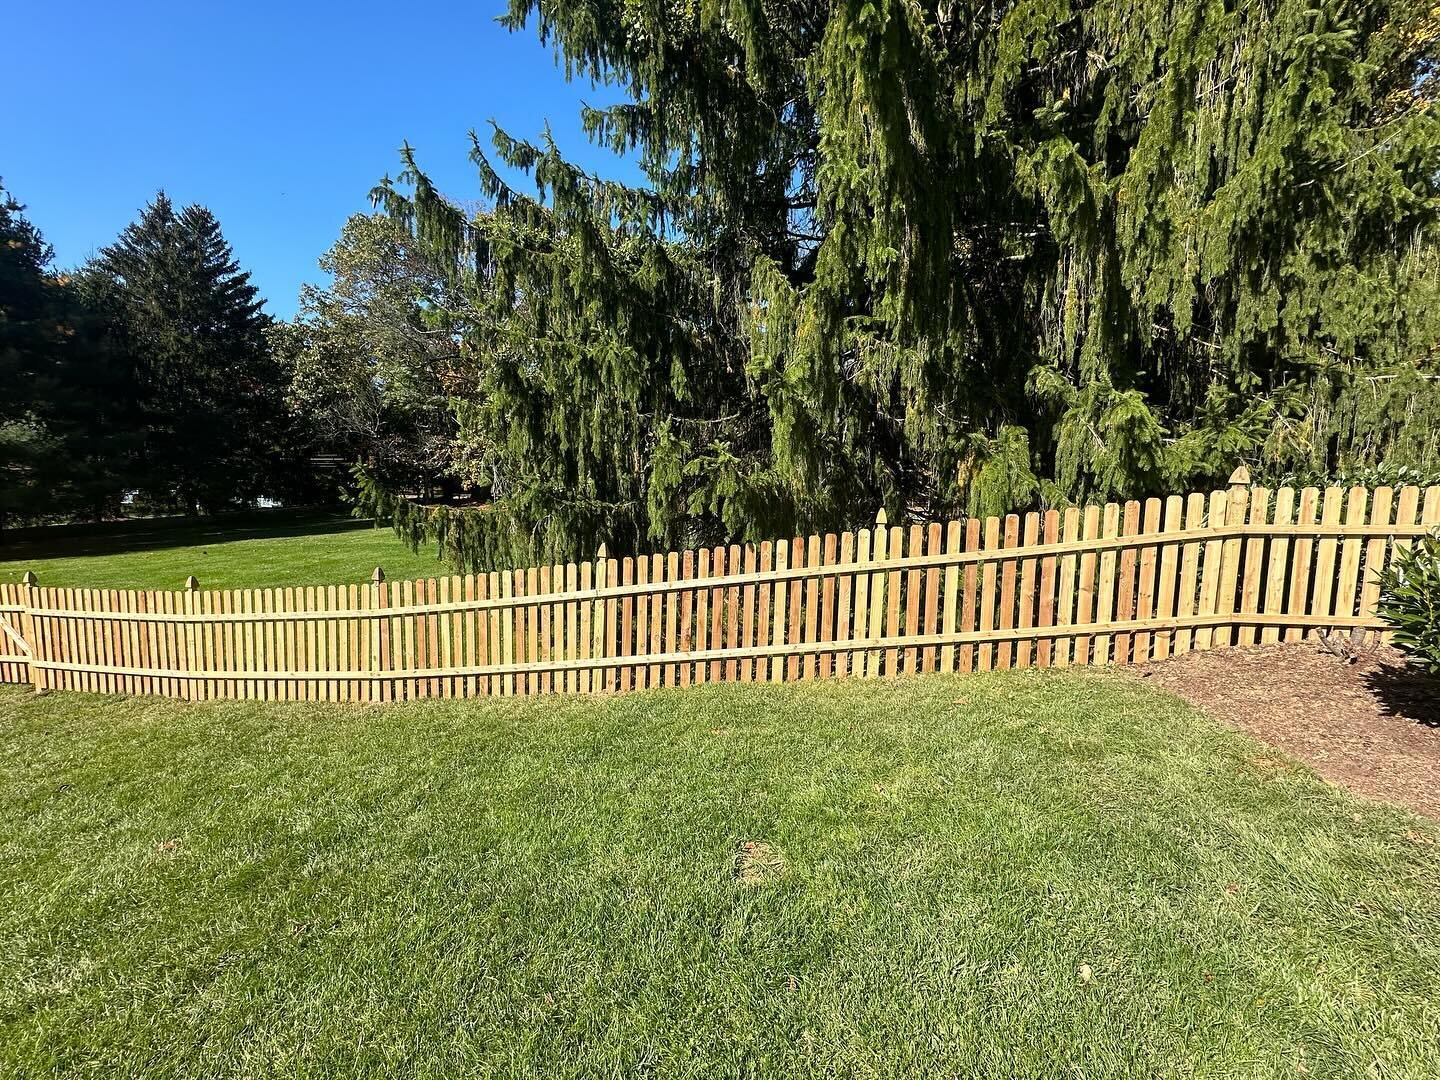 Behold our latest masterpiece: a charming space picket fence elegantly crafted by one of our dedicated crews! 🌿✨ 

Looking to enhance your space with custom fence solutions? Look no further! We turn visions into reality. Reach out today to discuss y